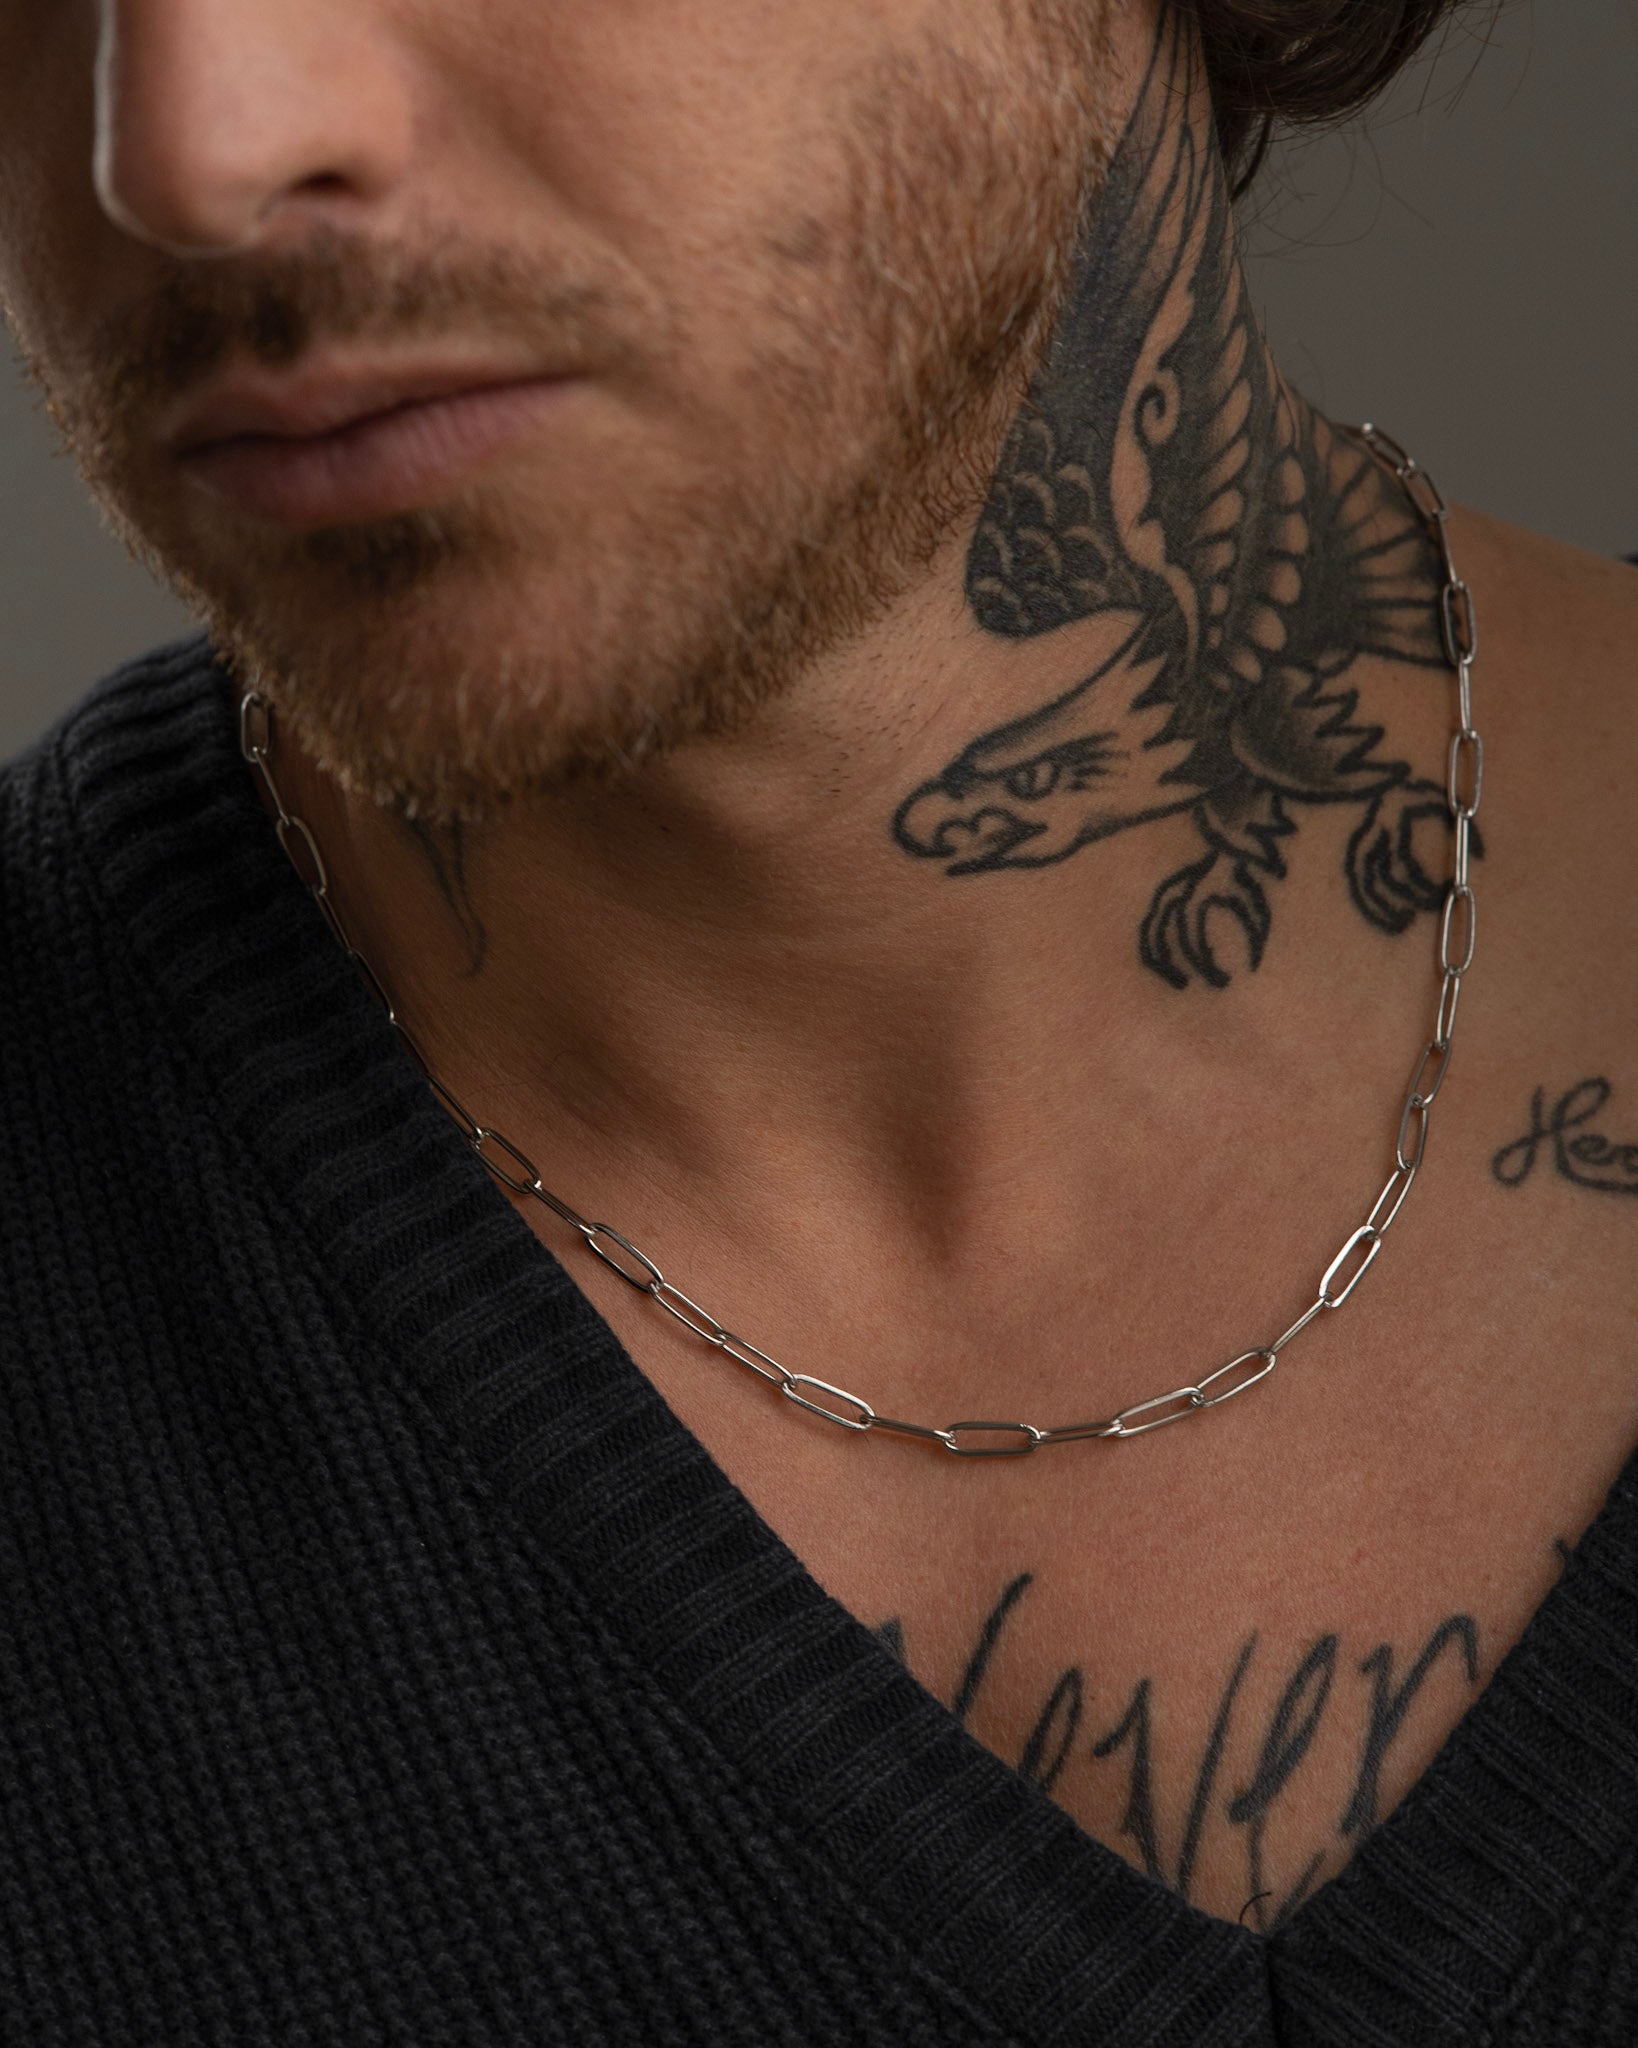 PRAZ men's necklace by Five Jwlry, crafted from a 5mm paperclip chain in silver-colored, water-resistant 316L stainless steel. Available in sizes 45cm, 50cm, and 55cm. Hypoallergenic with a 2-year warranty.